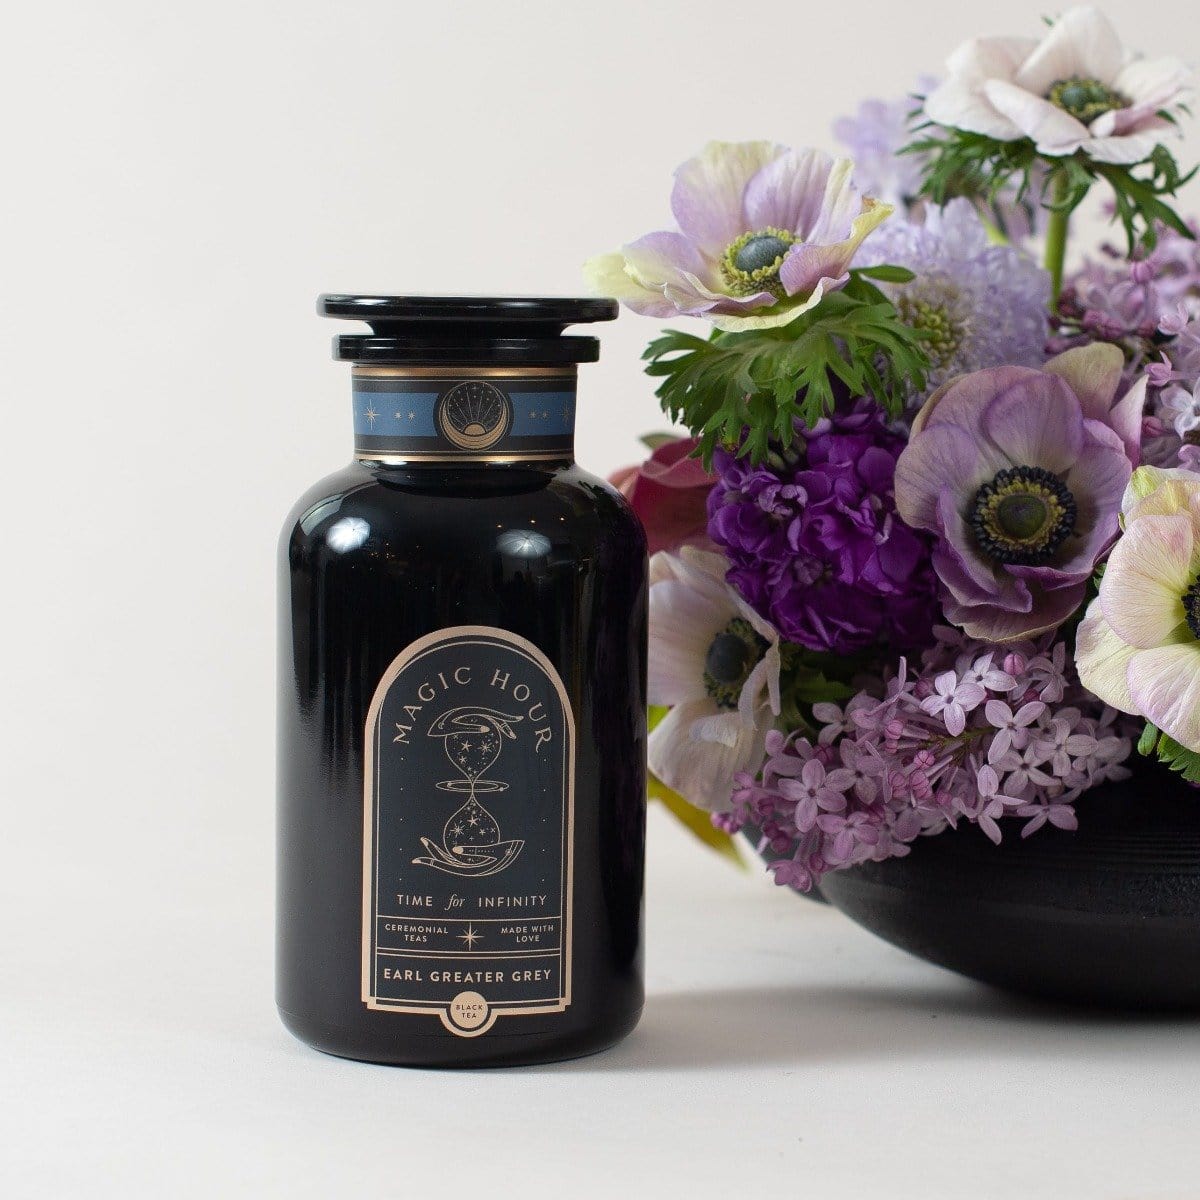 A black bottle labeled "Magic Hour - Earl Greater Grey: Tea for the Bright & Bold" sits beside a vibrant bouquet of purple and white flowers. Featuring an apothecary design with a cosmic hourglass label, this mysterious vessel contains Magic Hour's finest loose leaf tea, and the flowers are arranged in a black vase.